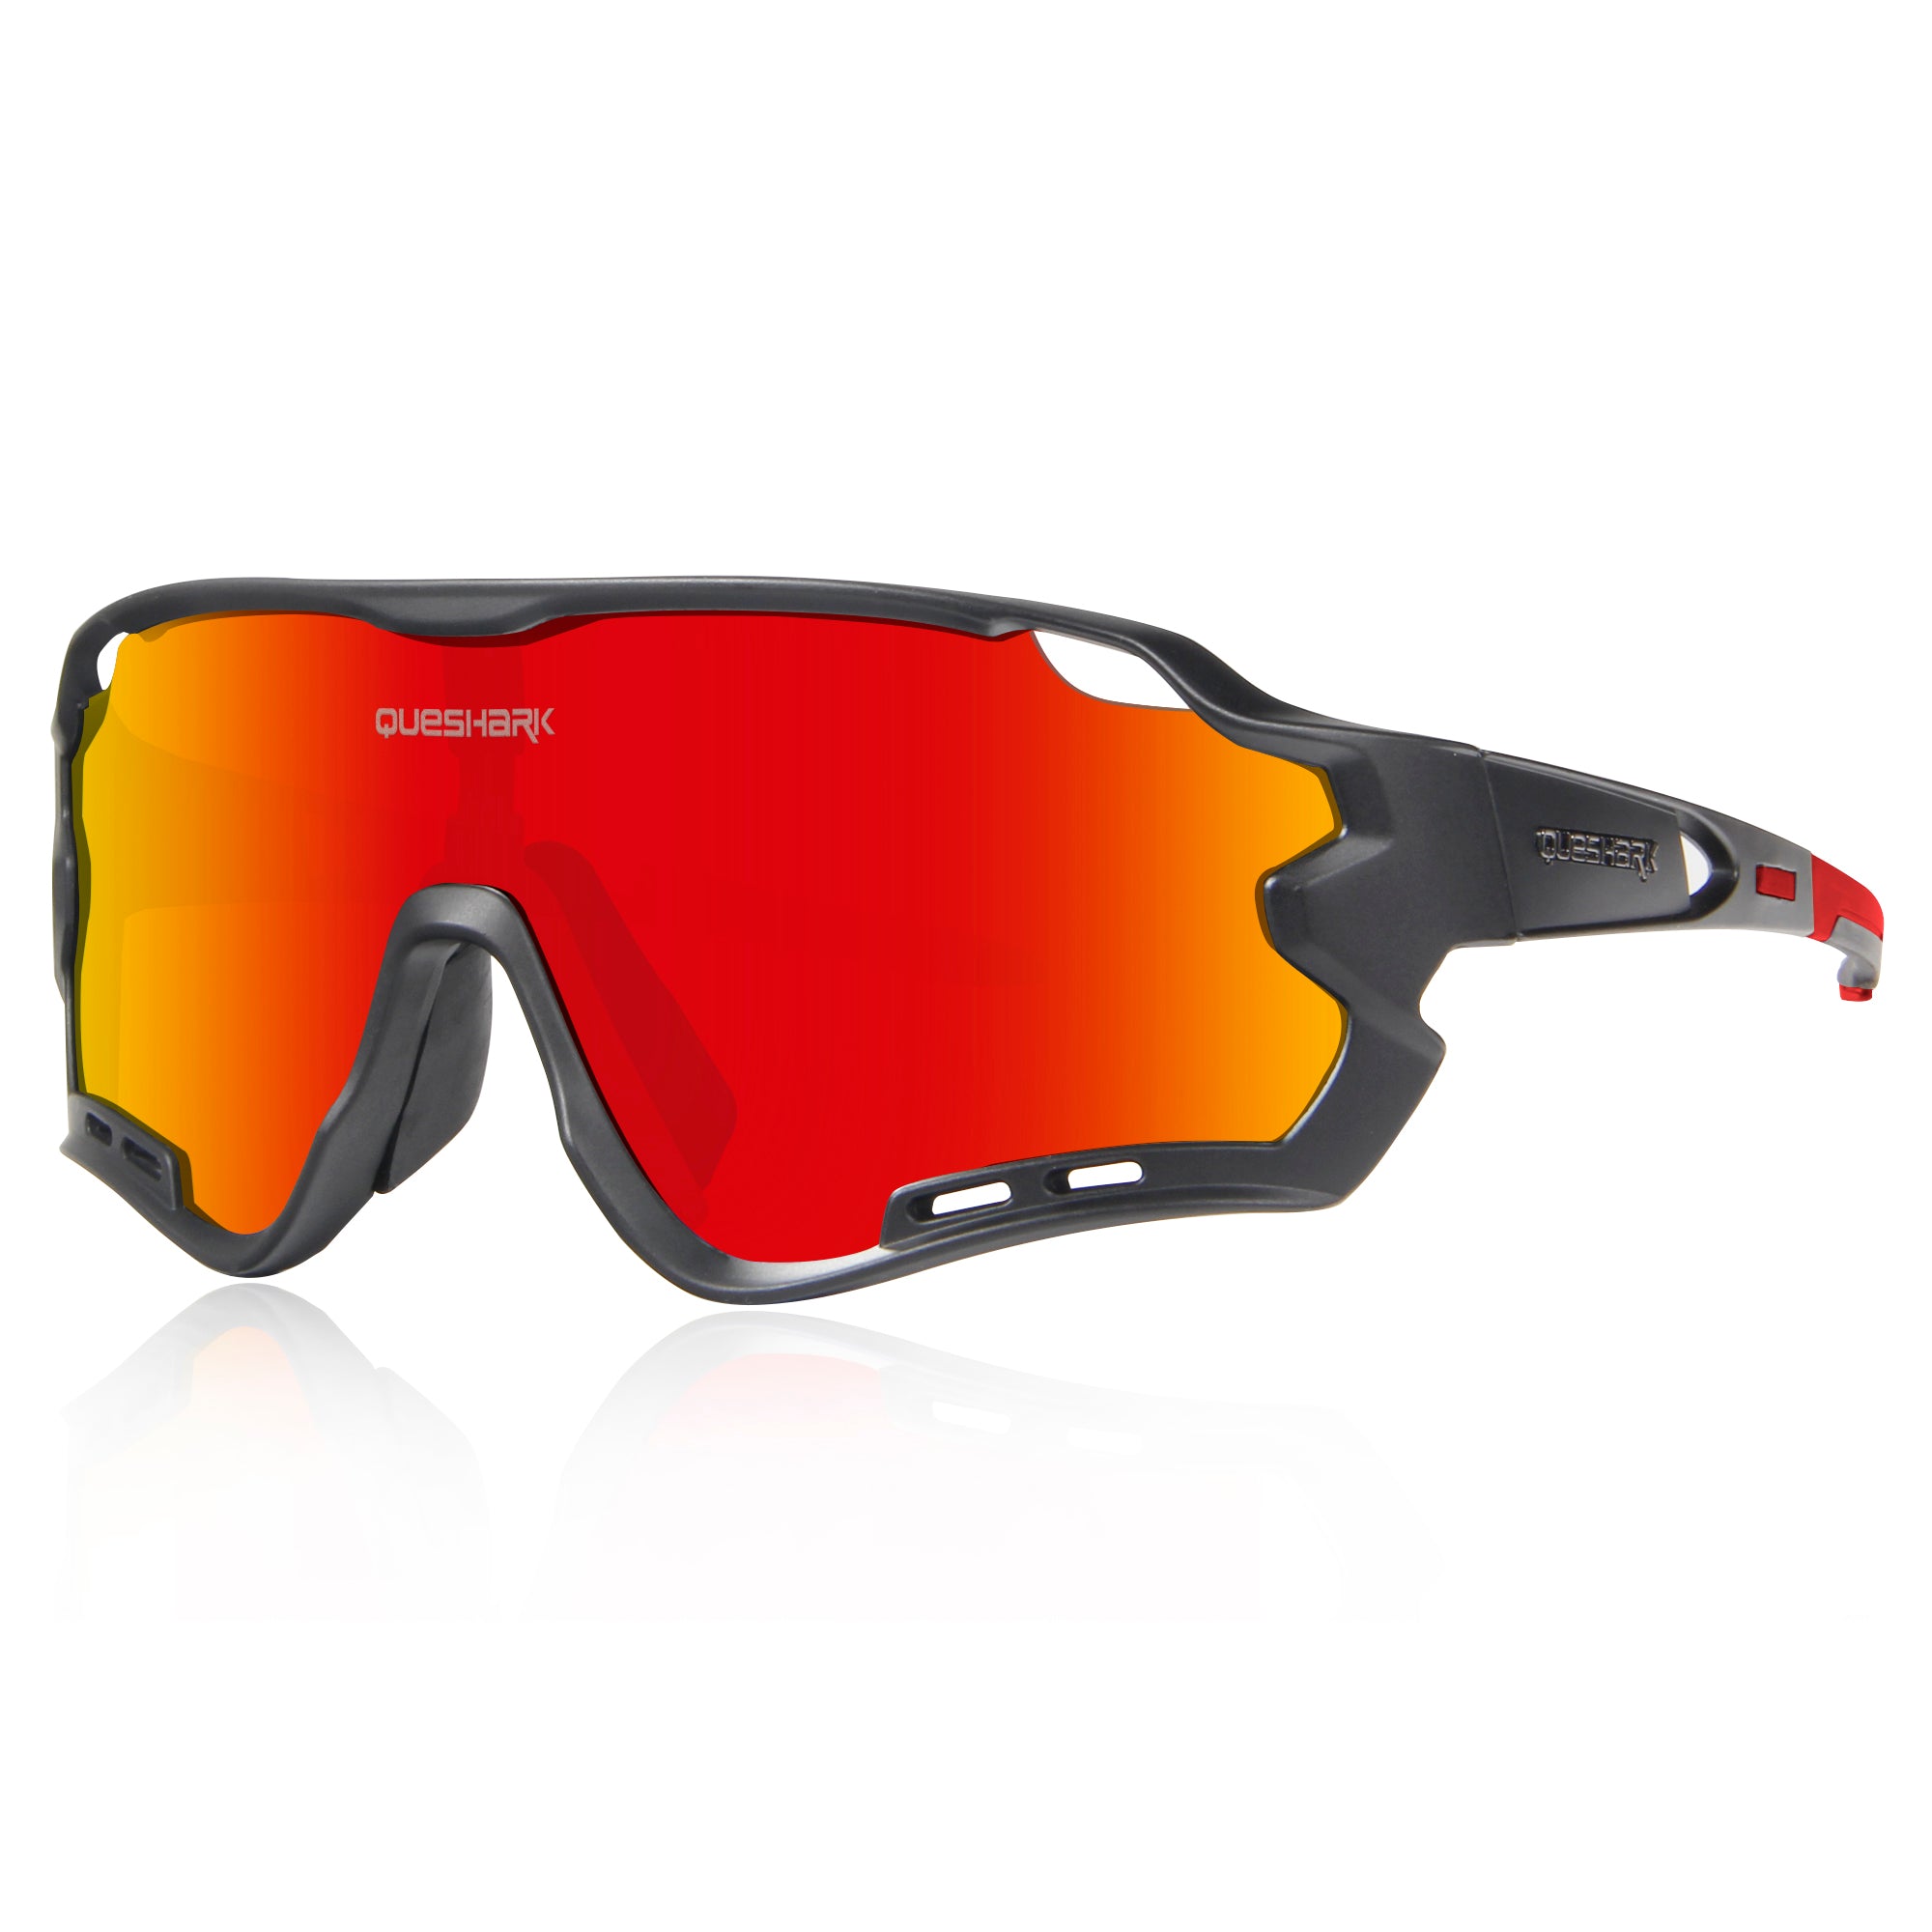 Queshark Outdoor Sports Cycling Glasses Polarized For Men